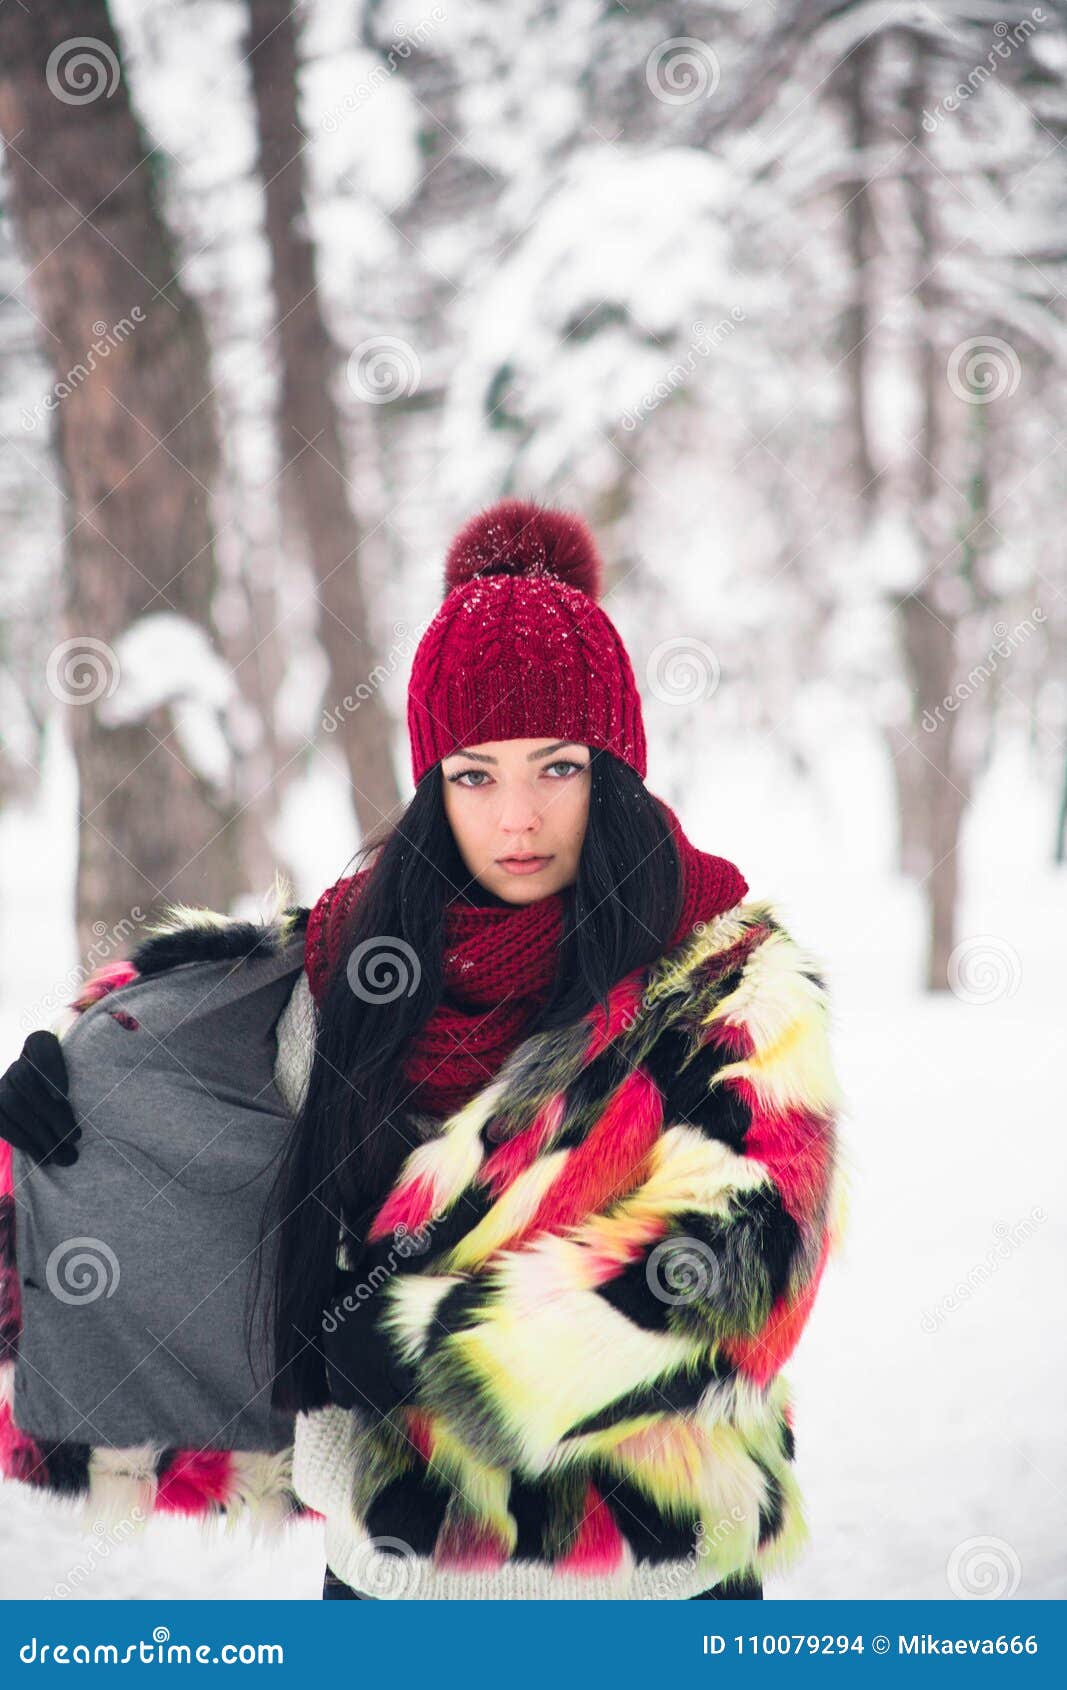 Young Woman in Multi-colored Fur Coat Stock Photo - Image of cheerful ...